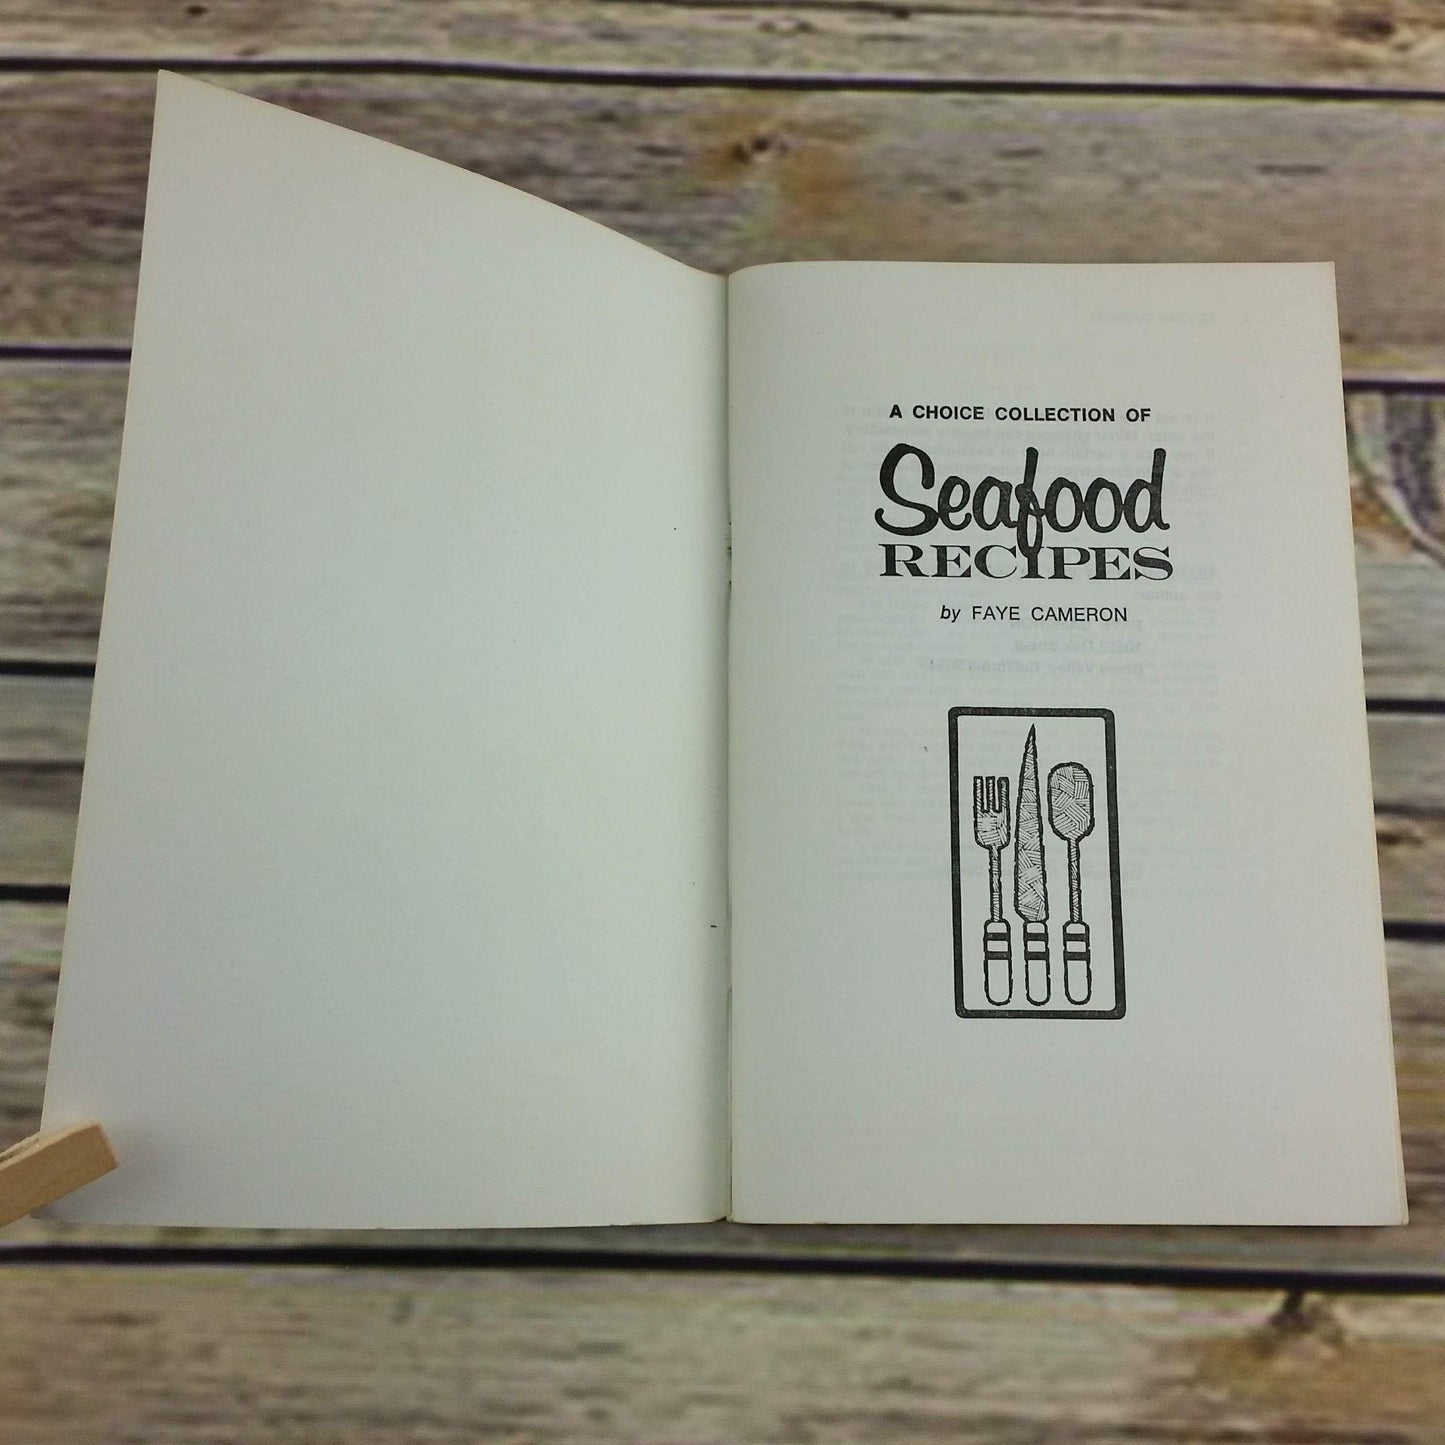 California Cookbook Seafood Recipes Collection 1975 Grass Valley Faye Cameron 500 Ways to Prepare Seafood